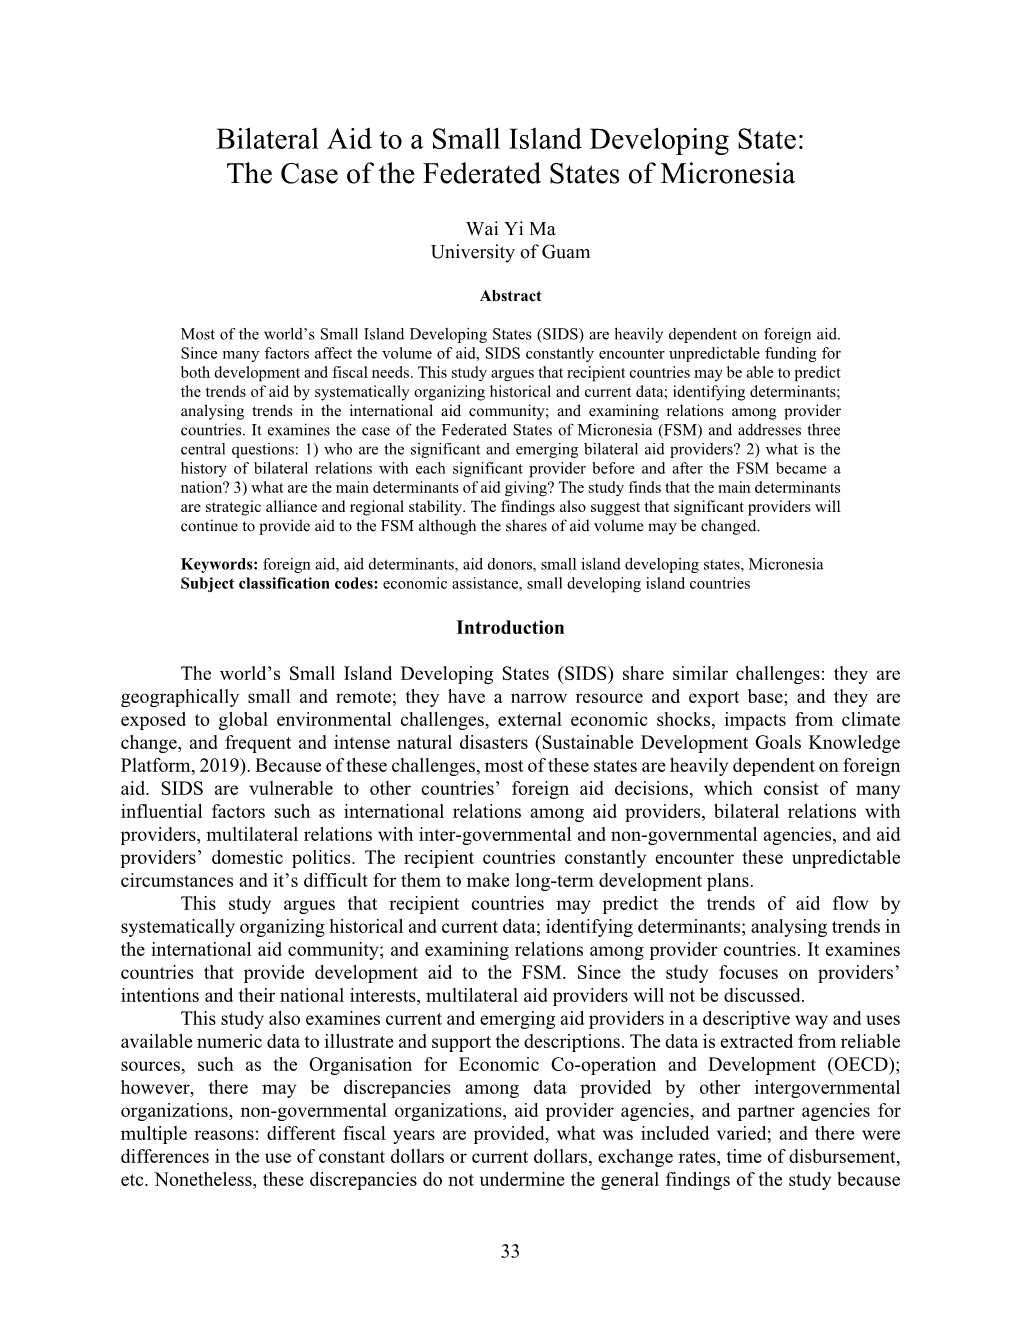 Bilateral Aid to a Small Island Developing State: the Case of the Federated States of Micronesia